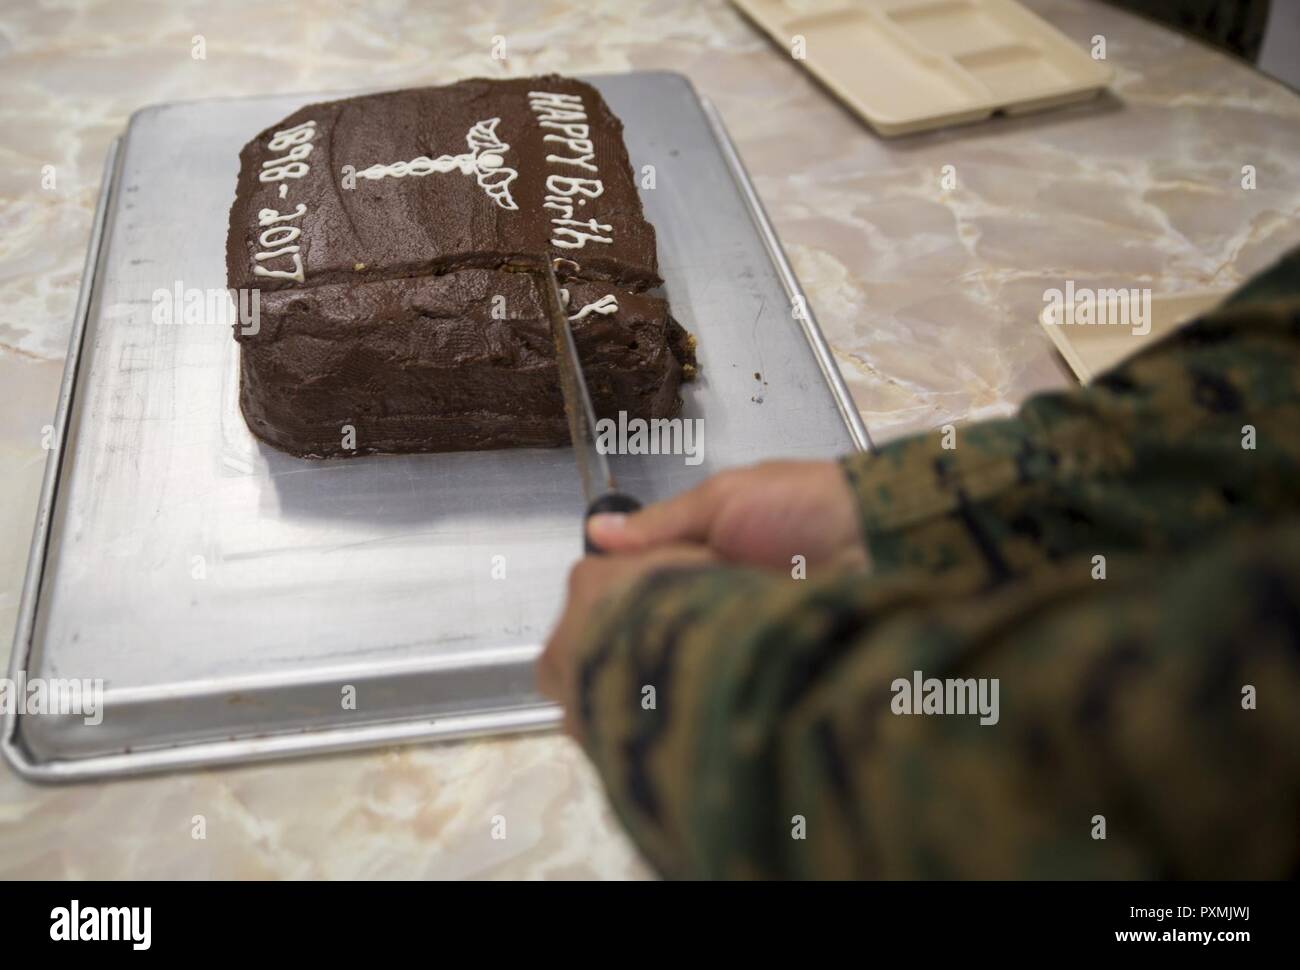 Chief Hospital Corpsman (Fleet Marine Force) Edgar E. Cuenca, a preventive medicine technician with Command Element, III Marine Expeditionary Force, cut a ceremonial cake into squares during a celebration for the 119th birthday of the hospital corpsman rate at Camp Mujuk, Pohang, Republic of Korea, June 17, 2017. Marines from Bravo Company, 3rd Law Enforcement Battalion, III Marine Headquarters Group, III MEF and Corpsmen with 3rd Medical Battaion, 3rd Marine Logistics Group, III MEF came together to celebrate the birthday with a ceremonial cake cutting and birthday message reading from 3rd LE Stock Photo